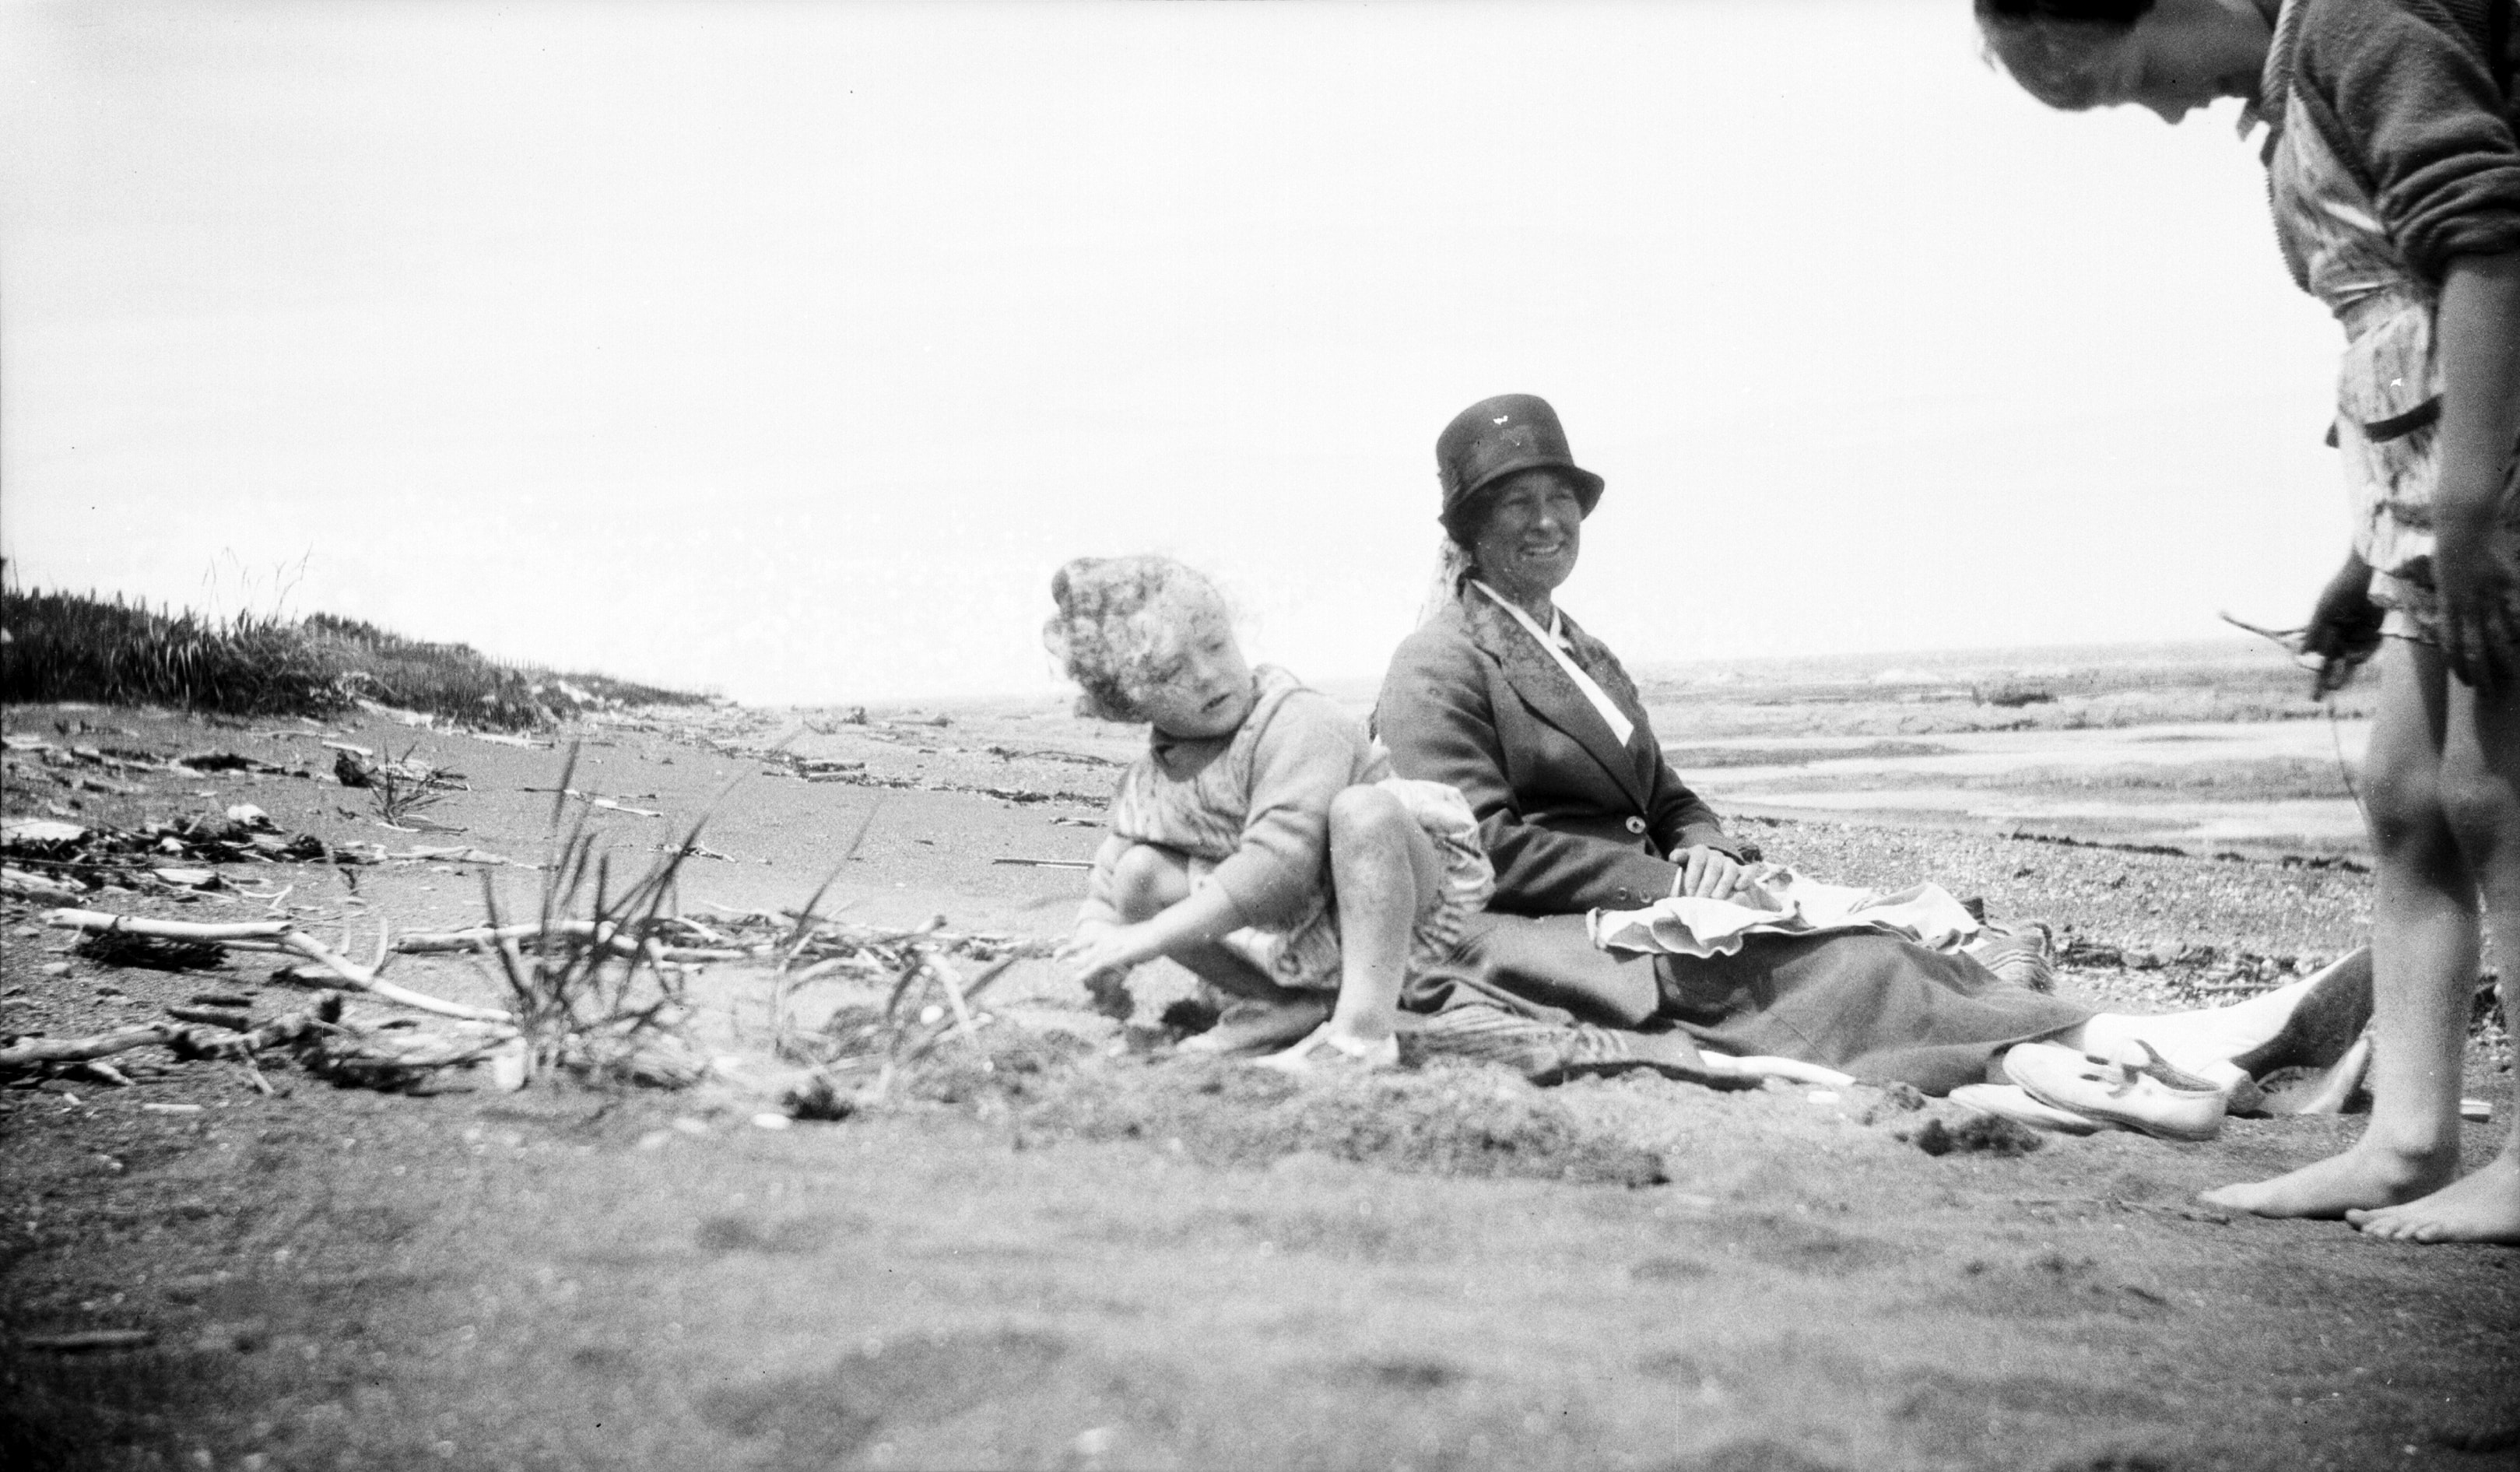 Two children play on the beach at low tide, watched over by a seated woman.